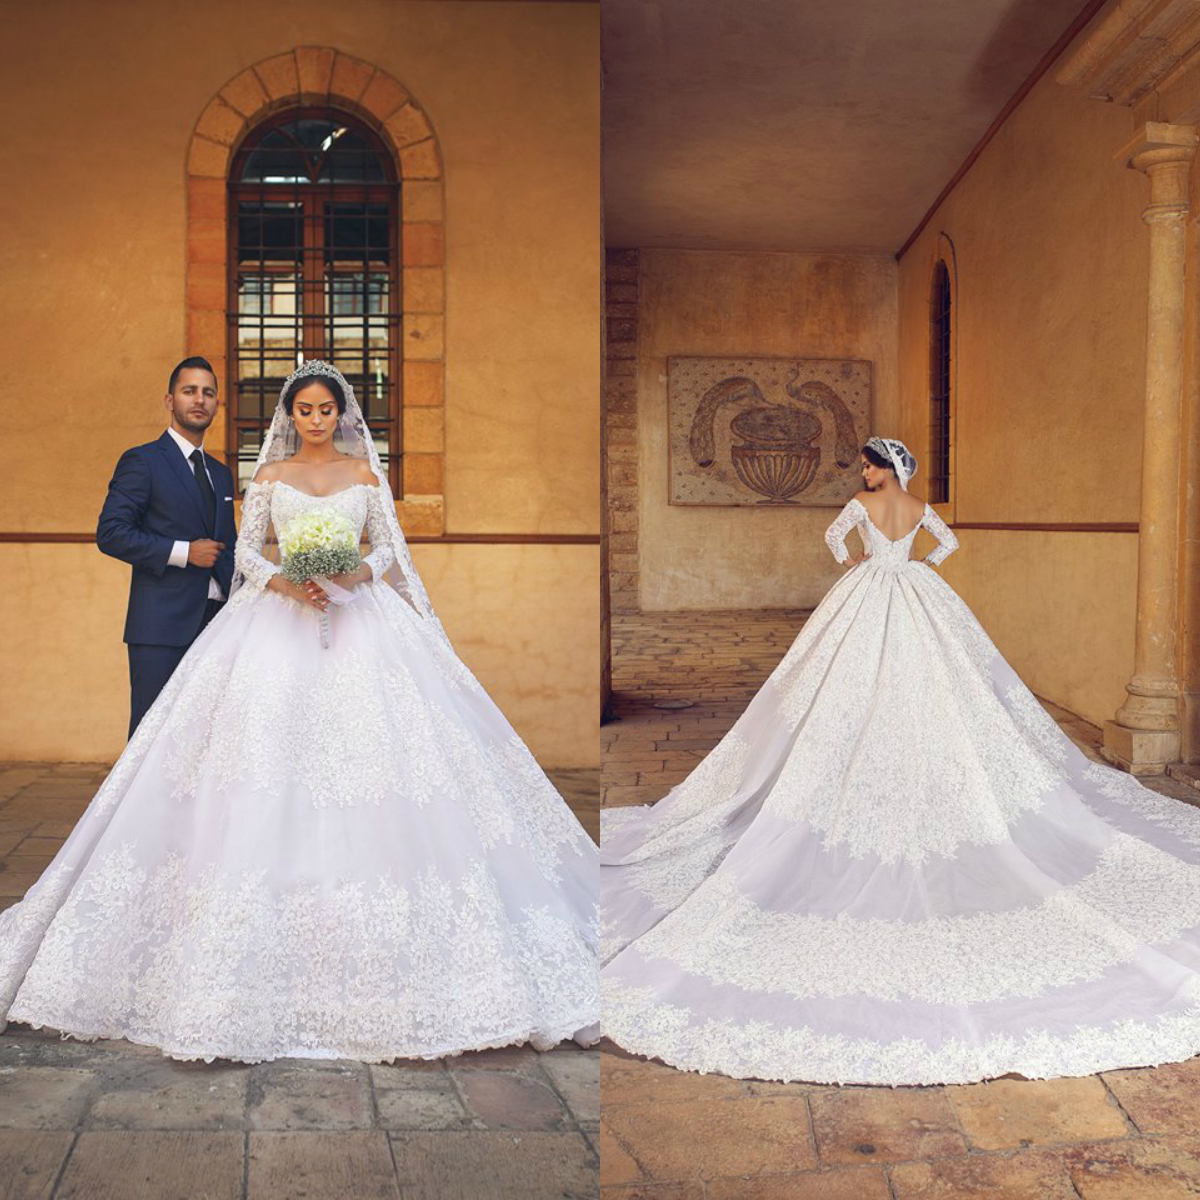 

2020 Lace Ball Gown Wedding Dresses Off The Shoulder Appliqued Modest Long Sleeve Bridal Gowns Custom Made Plus Size Robes De Mariée, Custom made from color chart